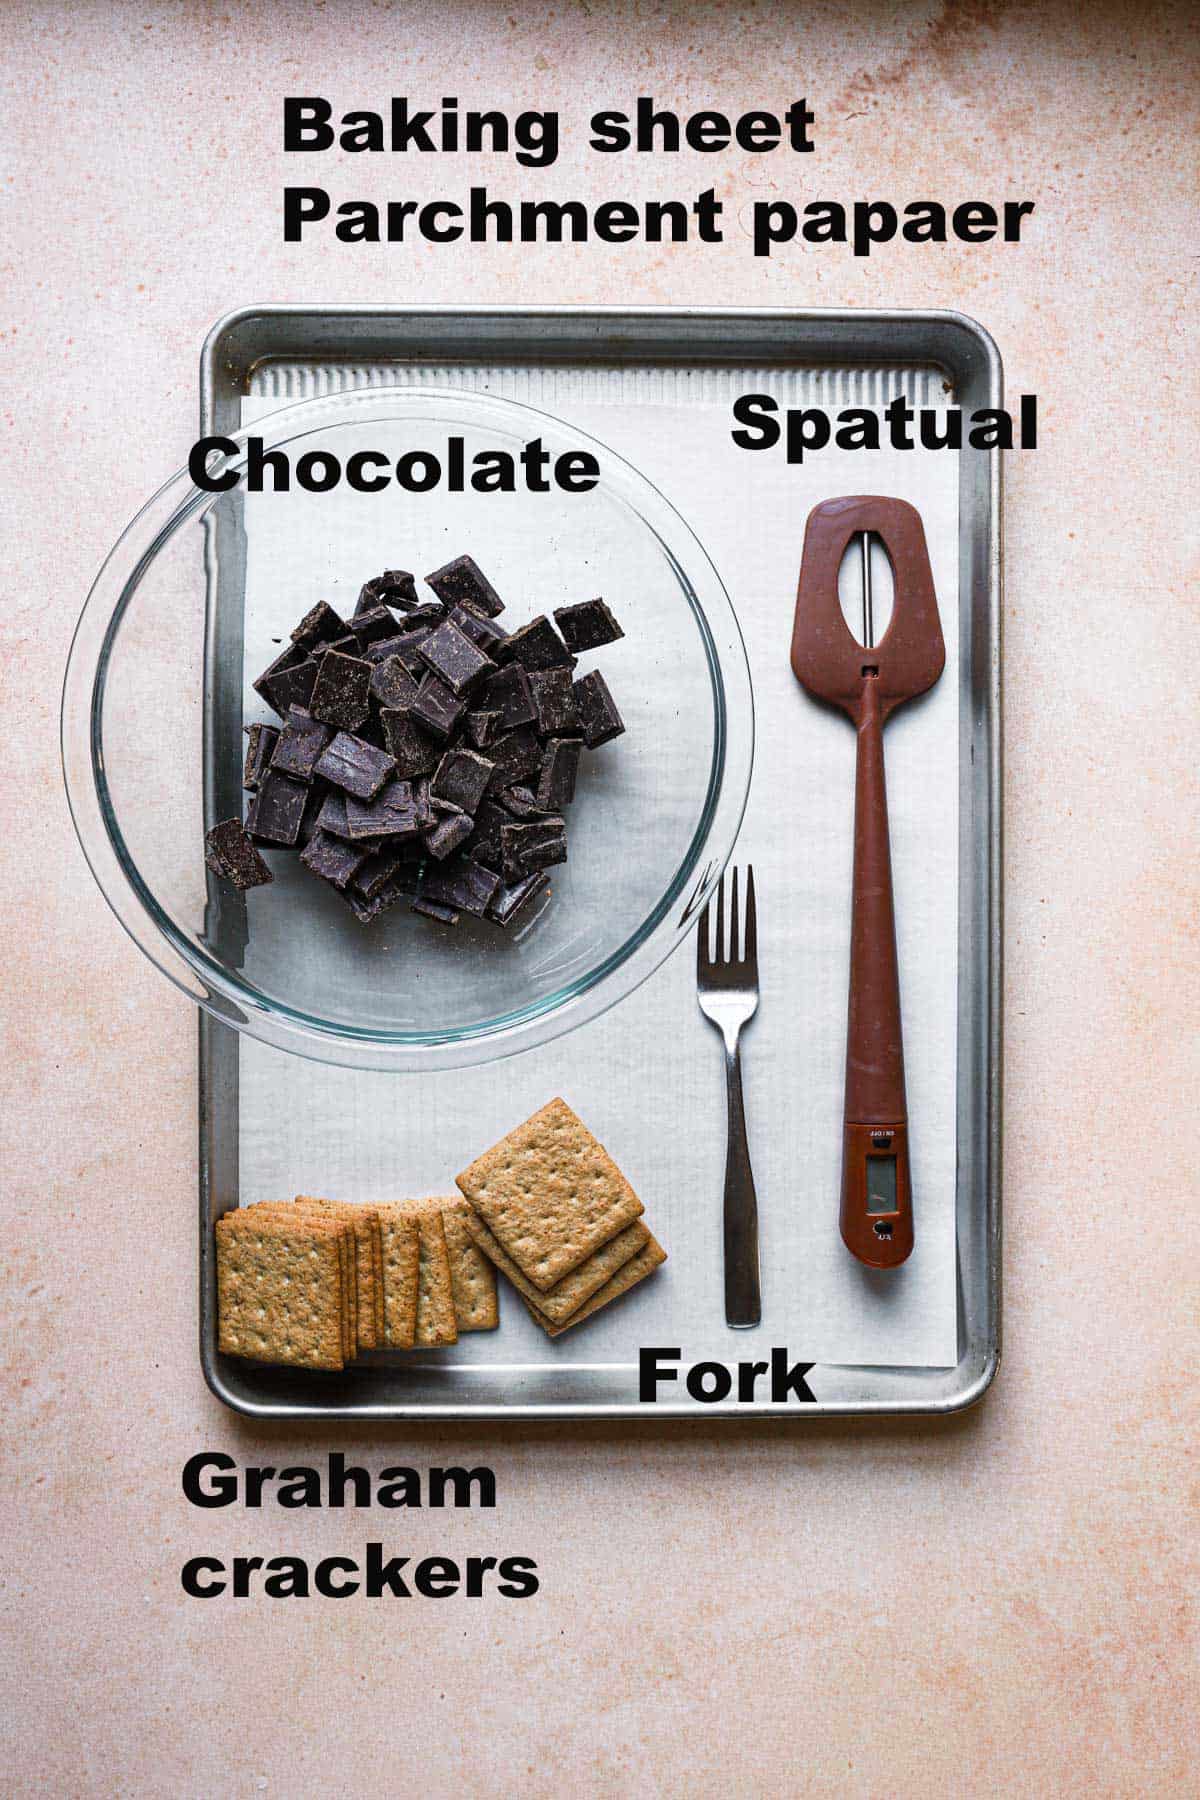 Ingredients and tolls for dipping cookies in chocolate